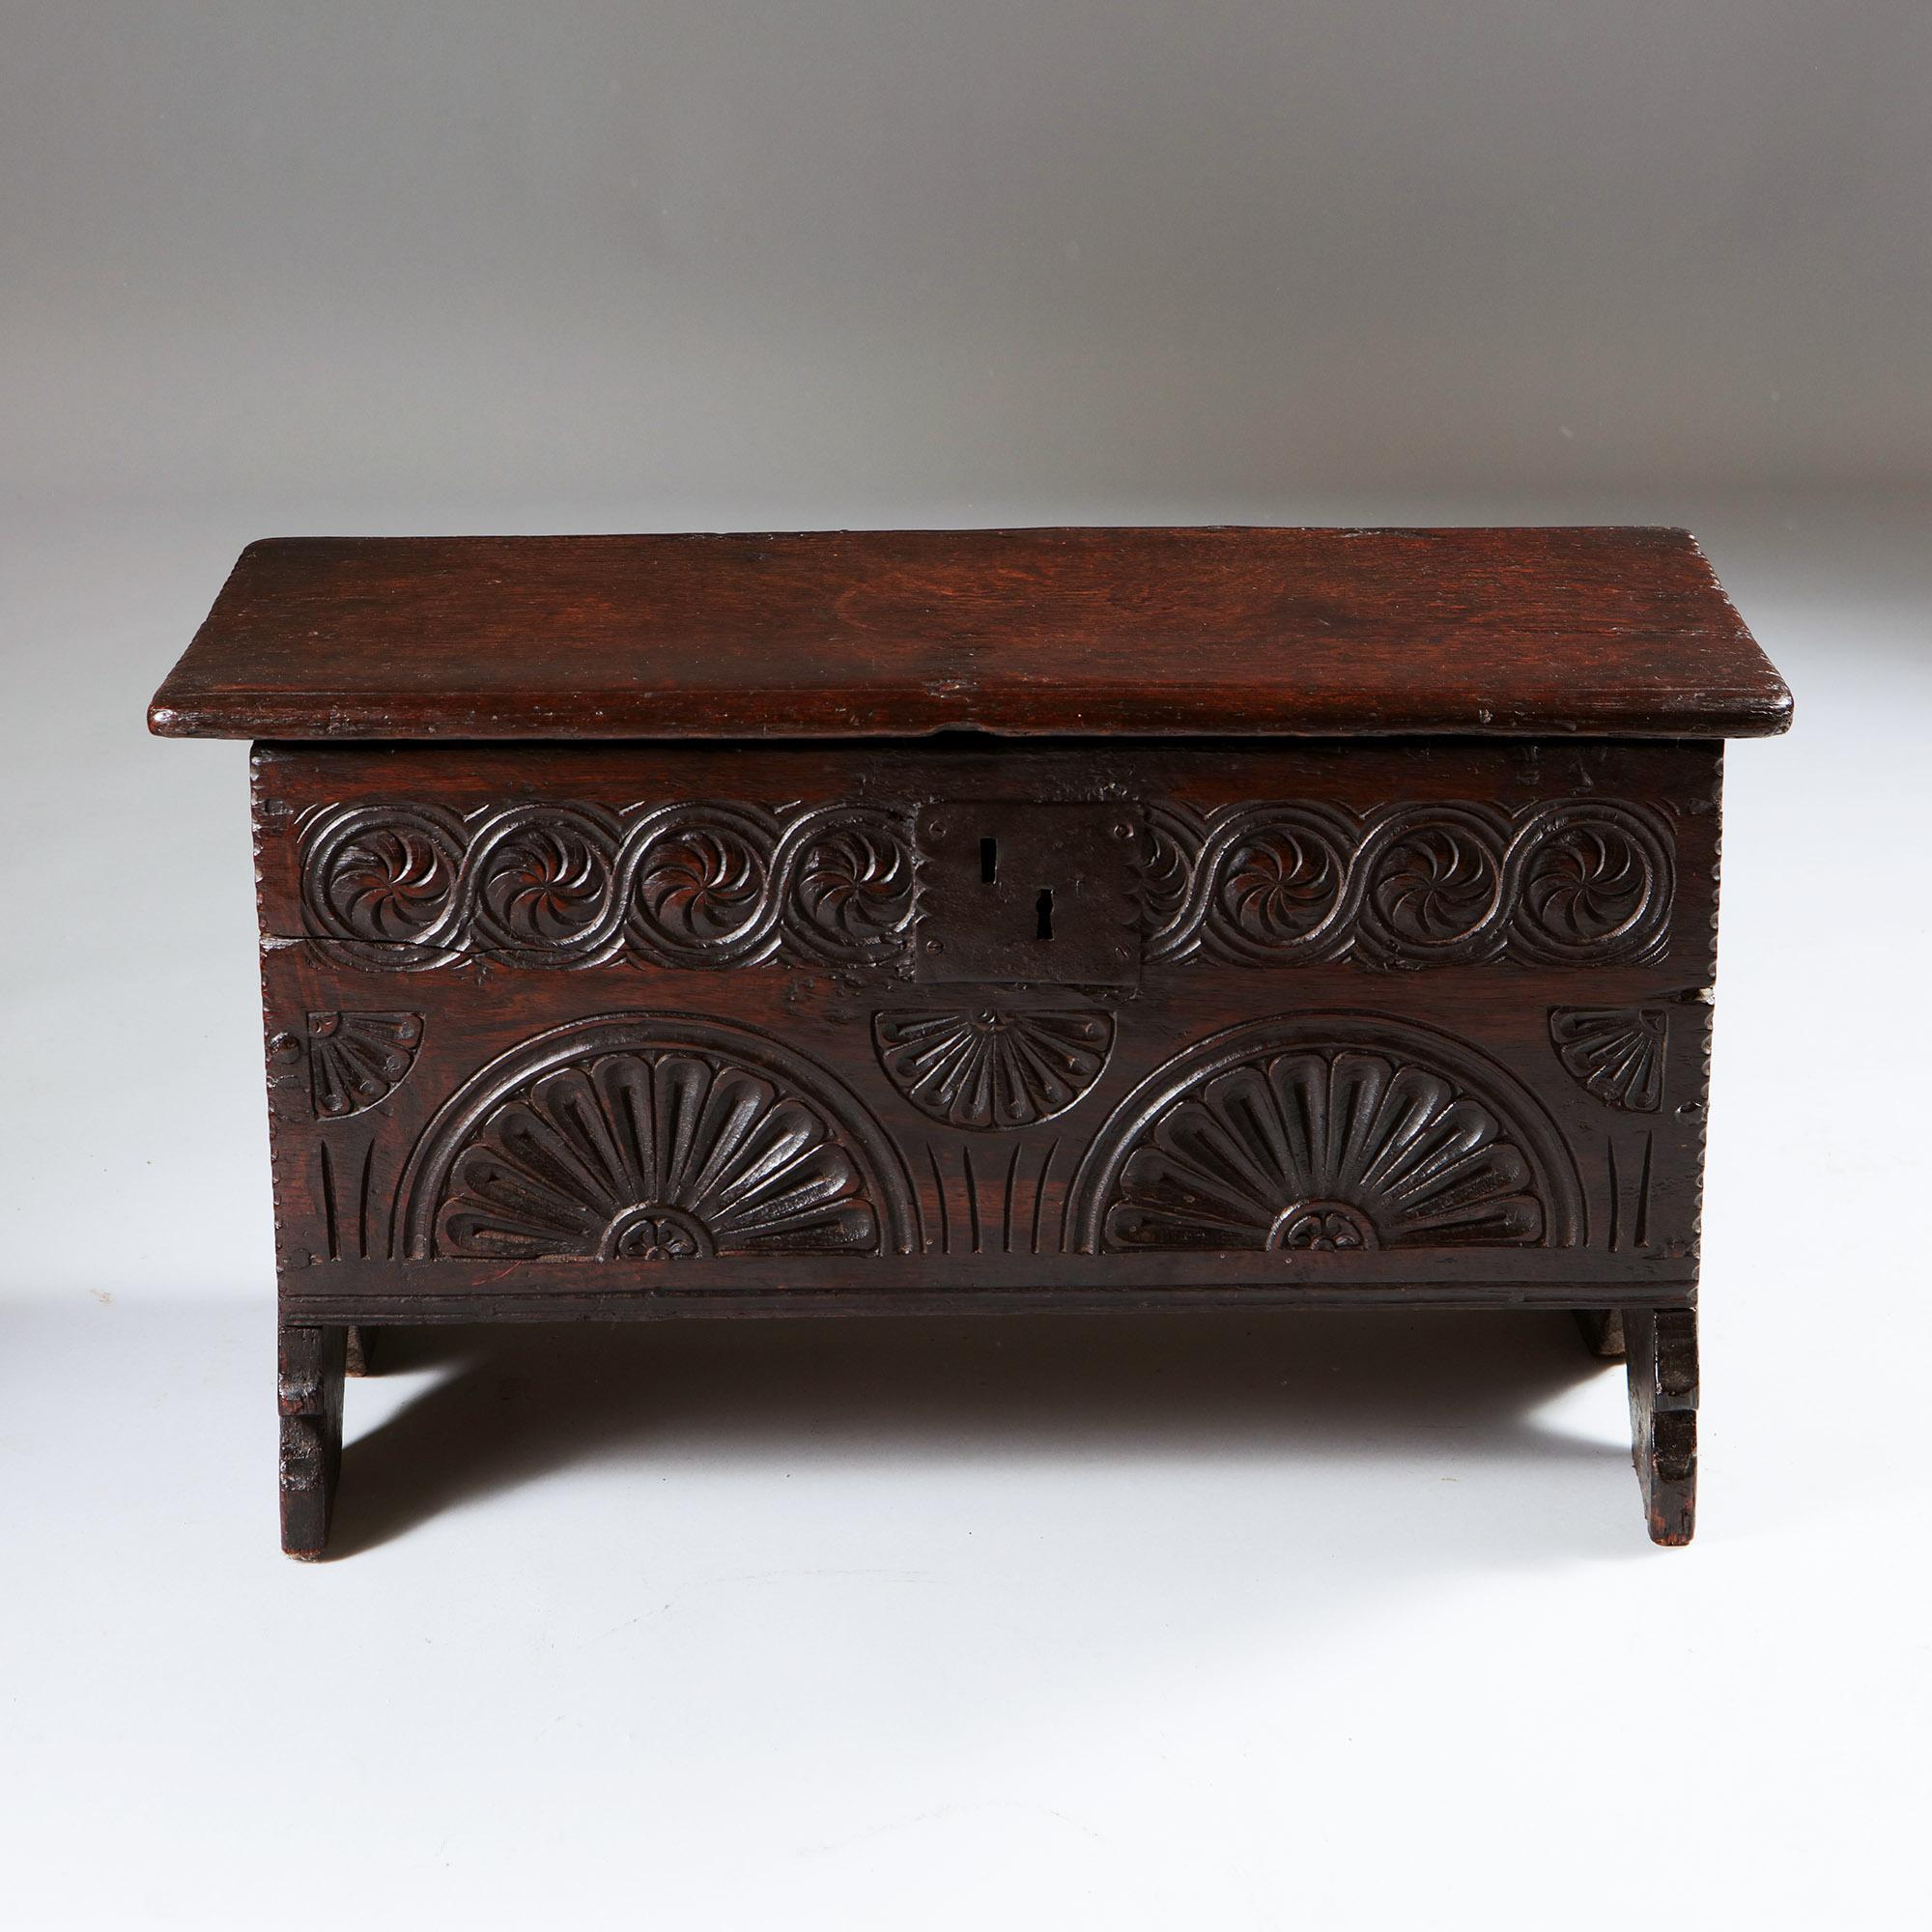 An extremely rare 17th-century early Charles II carved oak child's coffer of diminutive proportions. 


The lift-up lid opens on the originbal hinges. The frieze is crisply carved with lunar and geometric joining roundels.. Raised on the original